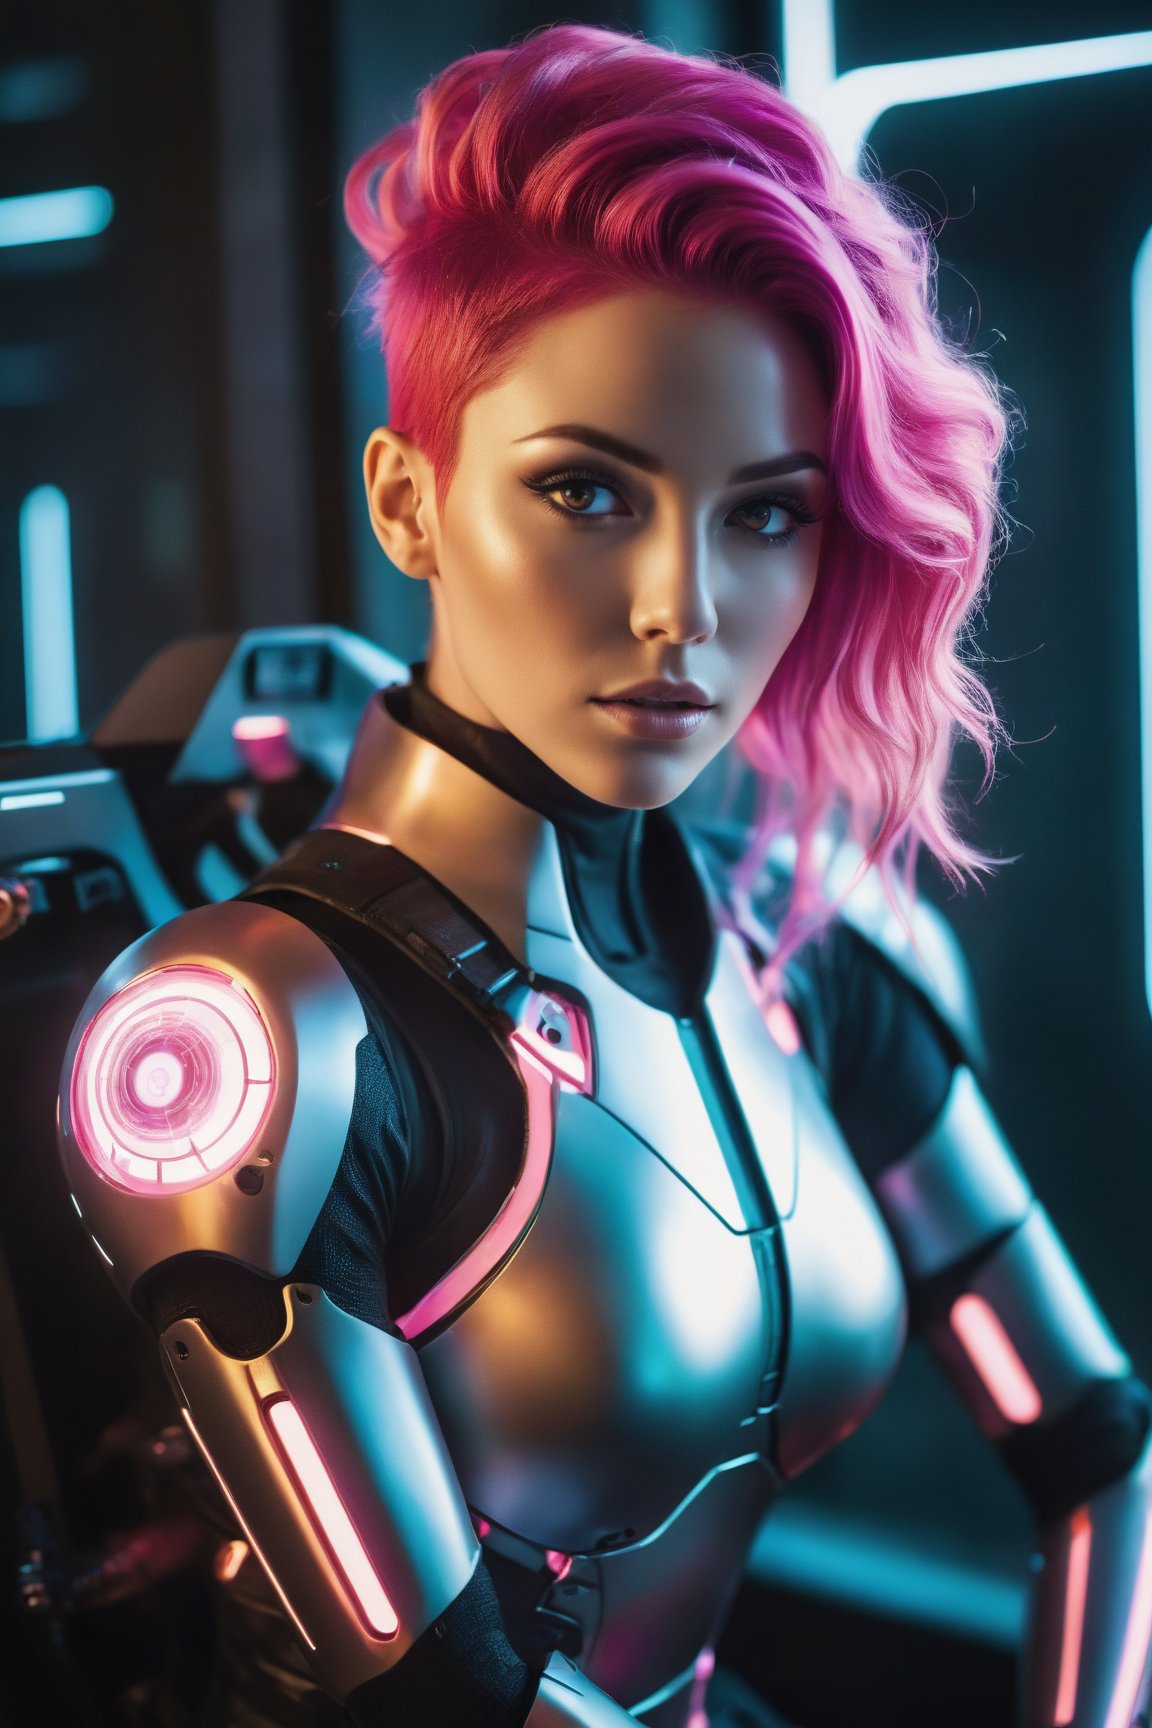 A stunning woman with flowing, vibrant pink hair and glowing eyes full of determination sits in a dimly lit room with a soft, ethereal glow from a panel on the wall. She wears a high-tech exoskeleton with glowing bio-mechanical tendrils, expressing curiosity and empowerment in a futuristic setting.